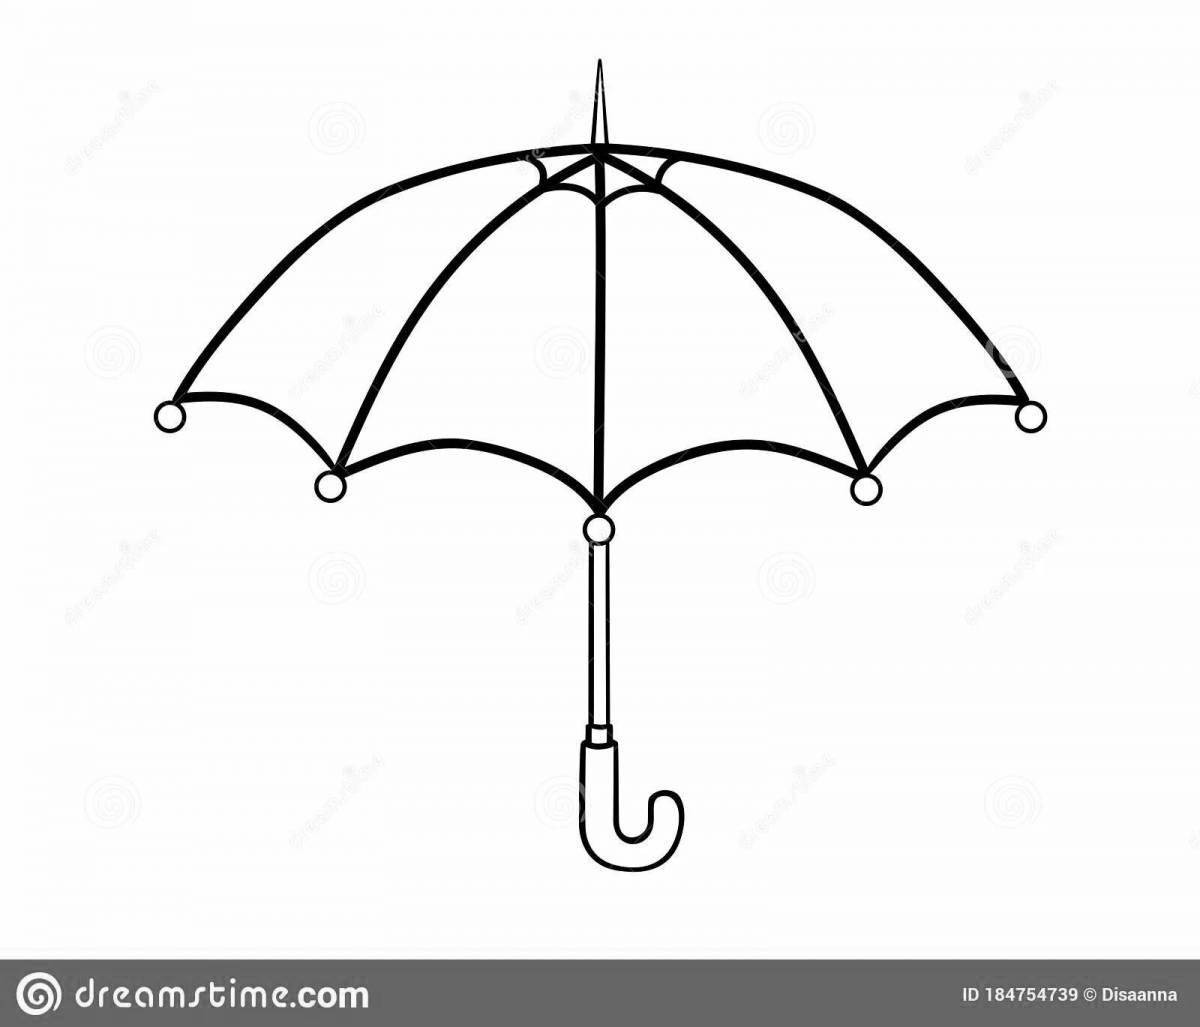 Adorable umbrella coloring page for 3-4 year olds